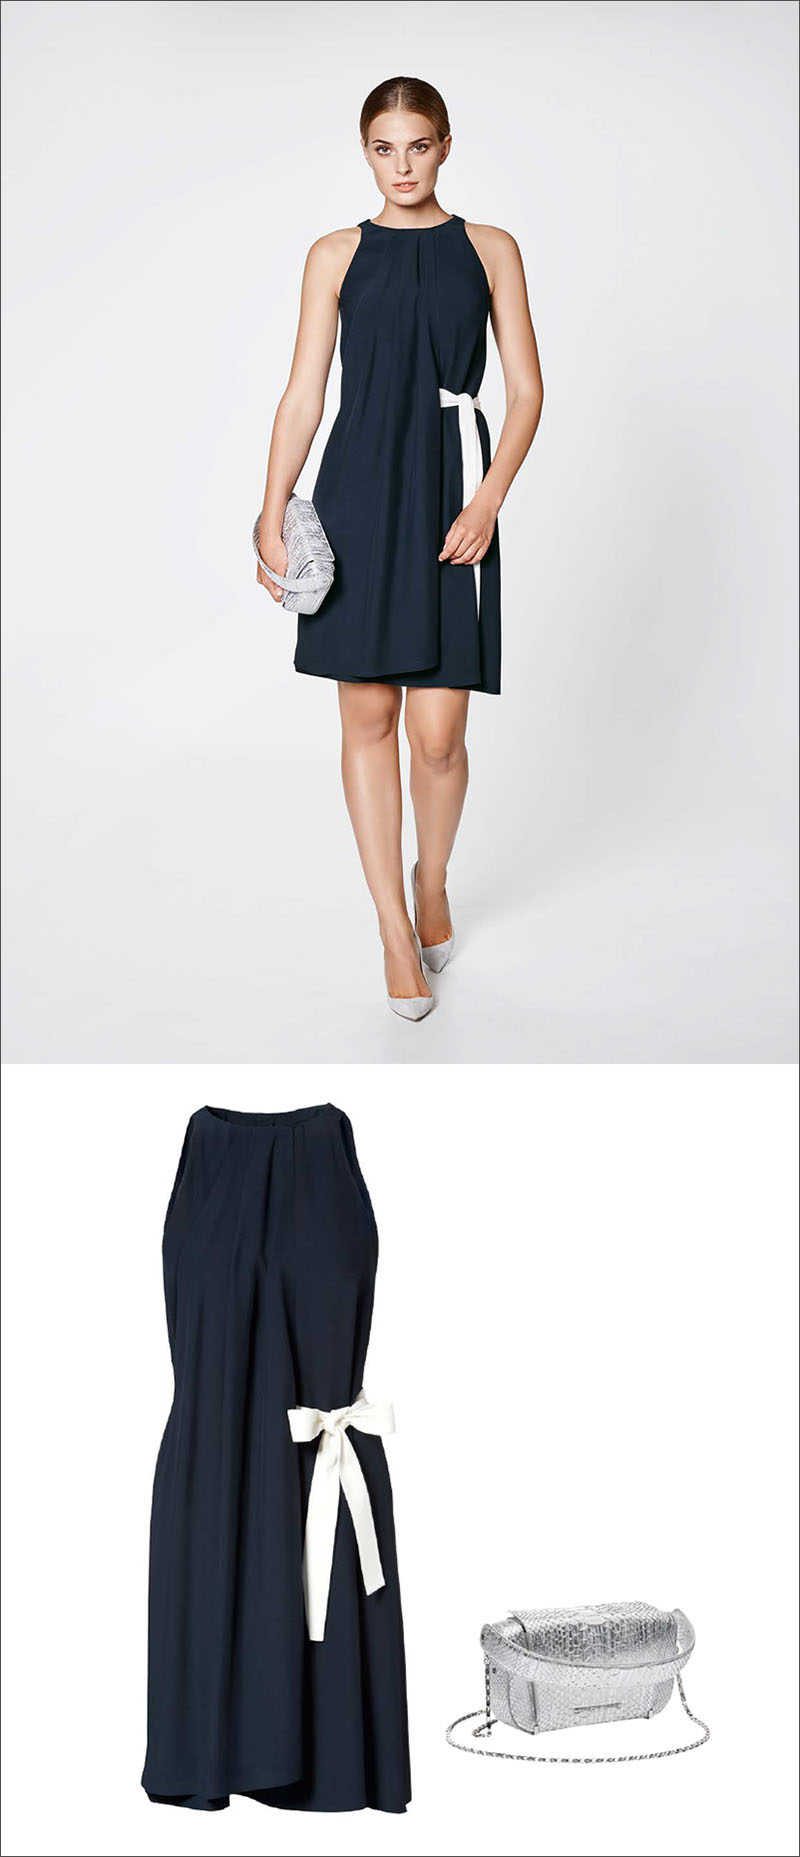 Women's Fashion Ideas - 12 Womens Outfits From Porsche Design's 2017 Spring/Summer Collection // A navy dress with a white side bow and a silver bag create this girly women's outfit.